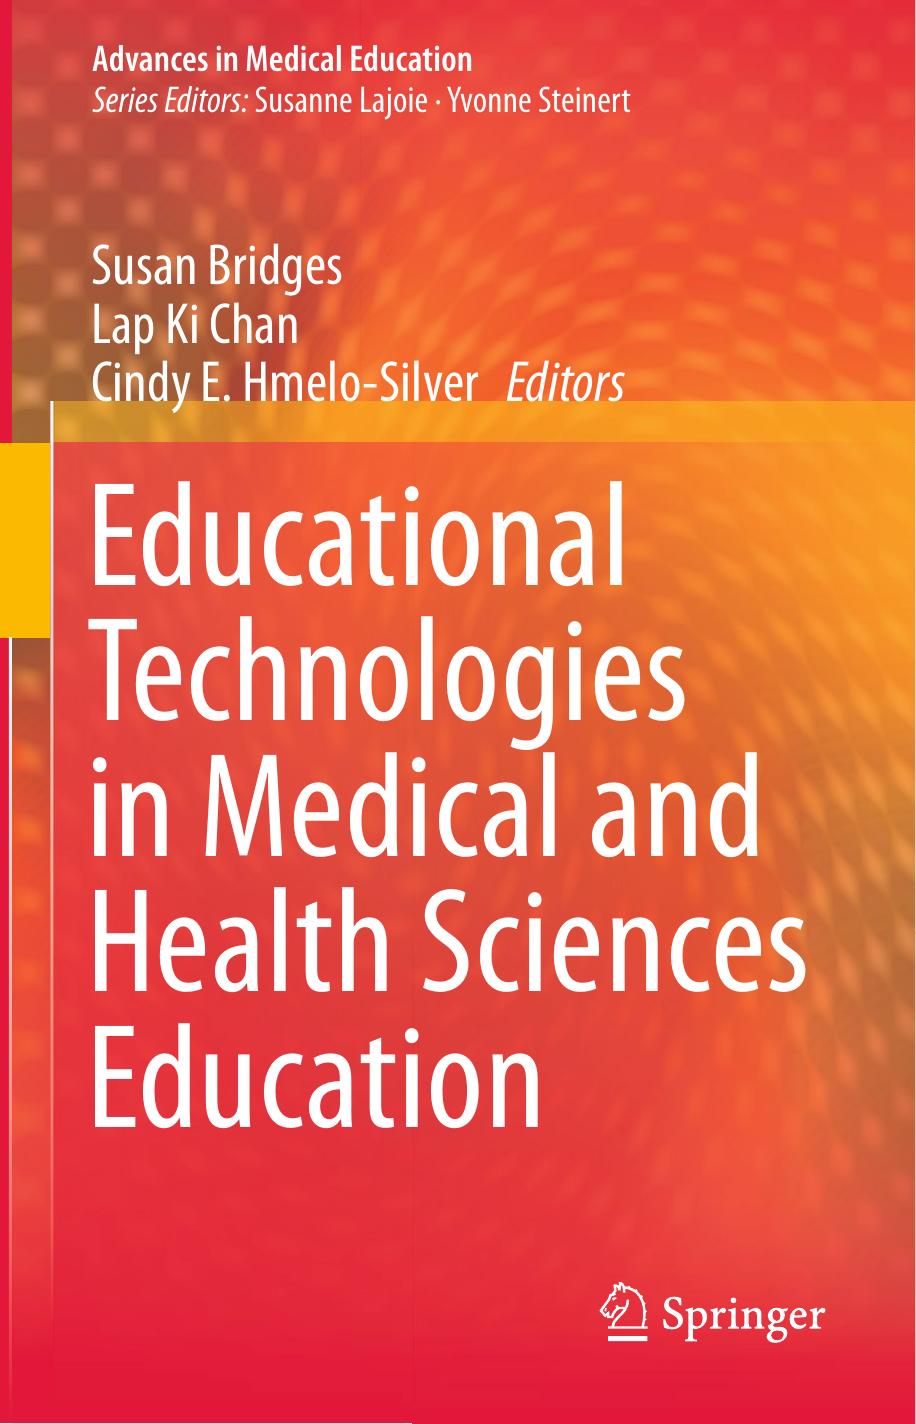 Educational Technologies in Medical and Health Sciences Education 2016